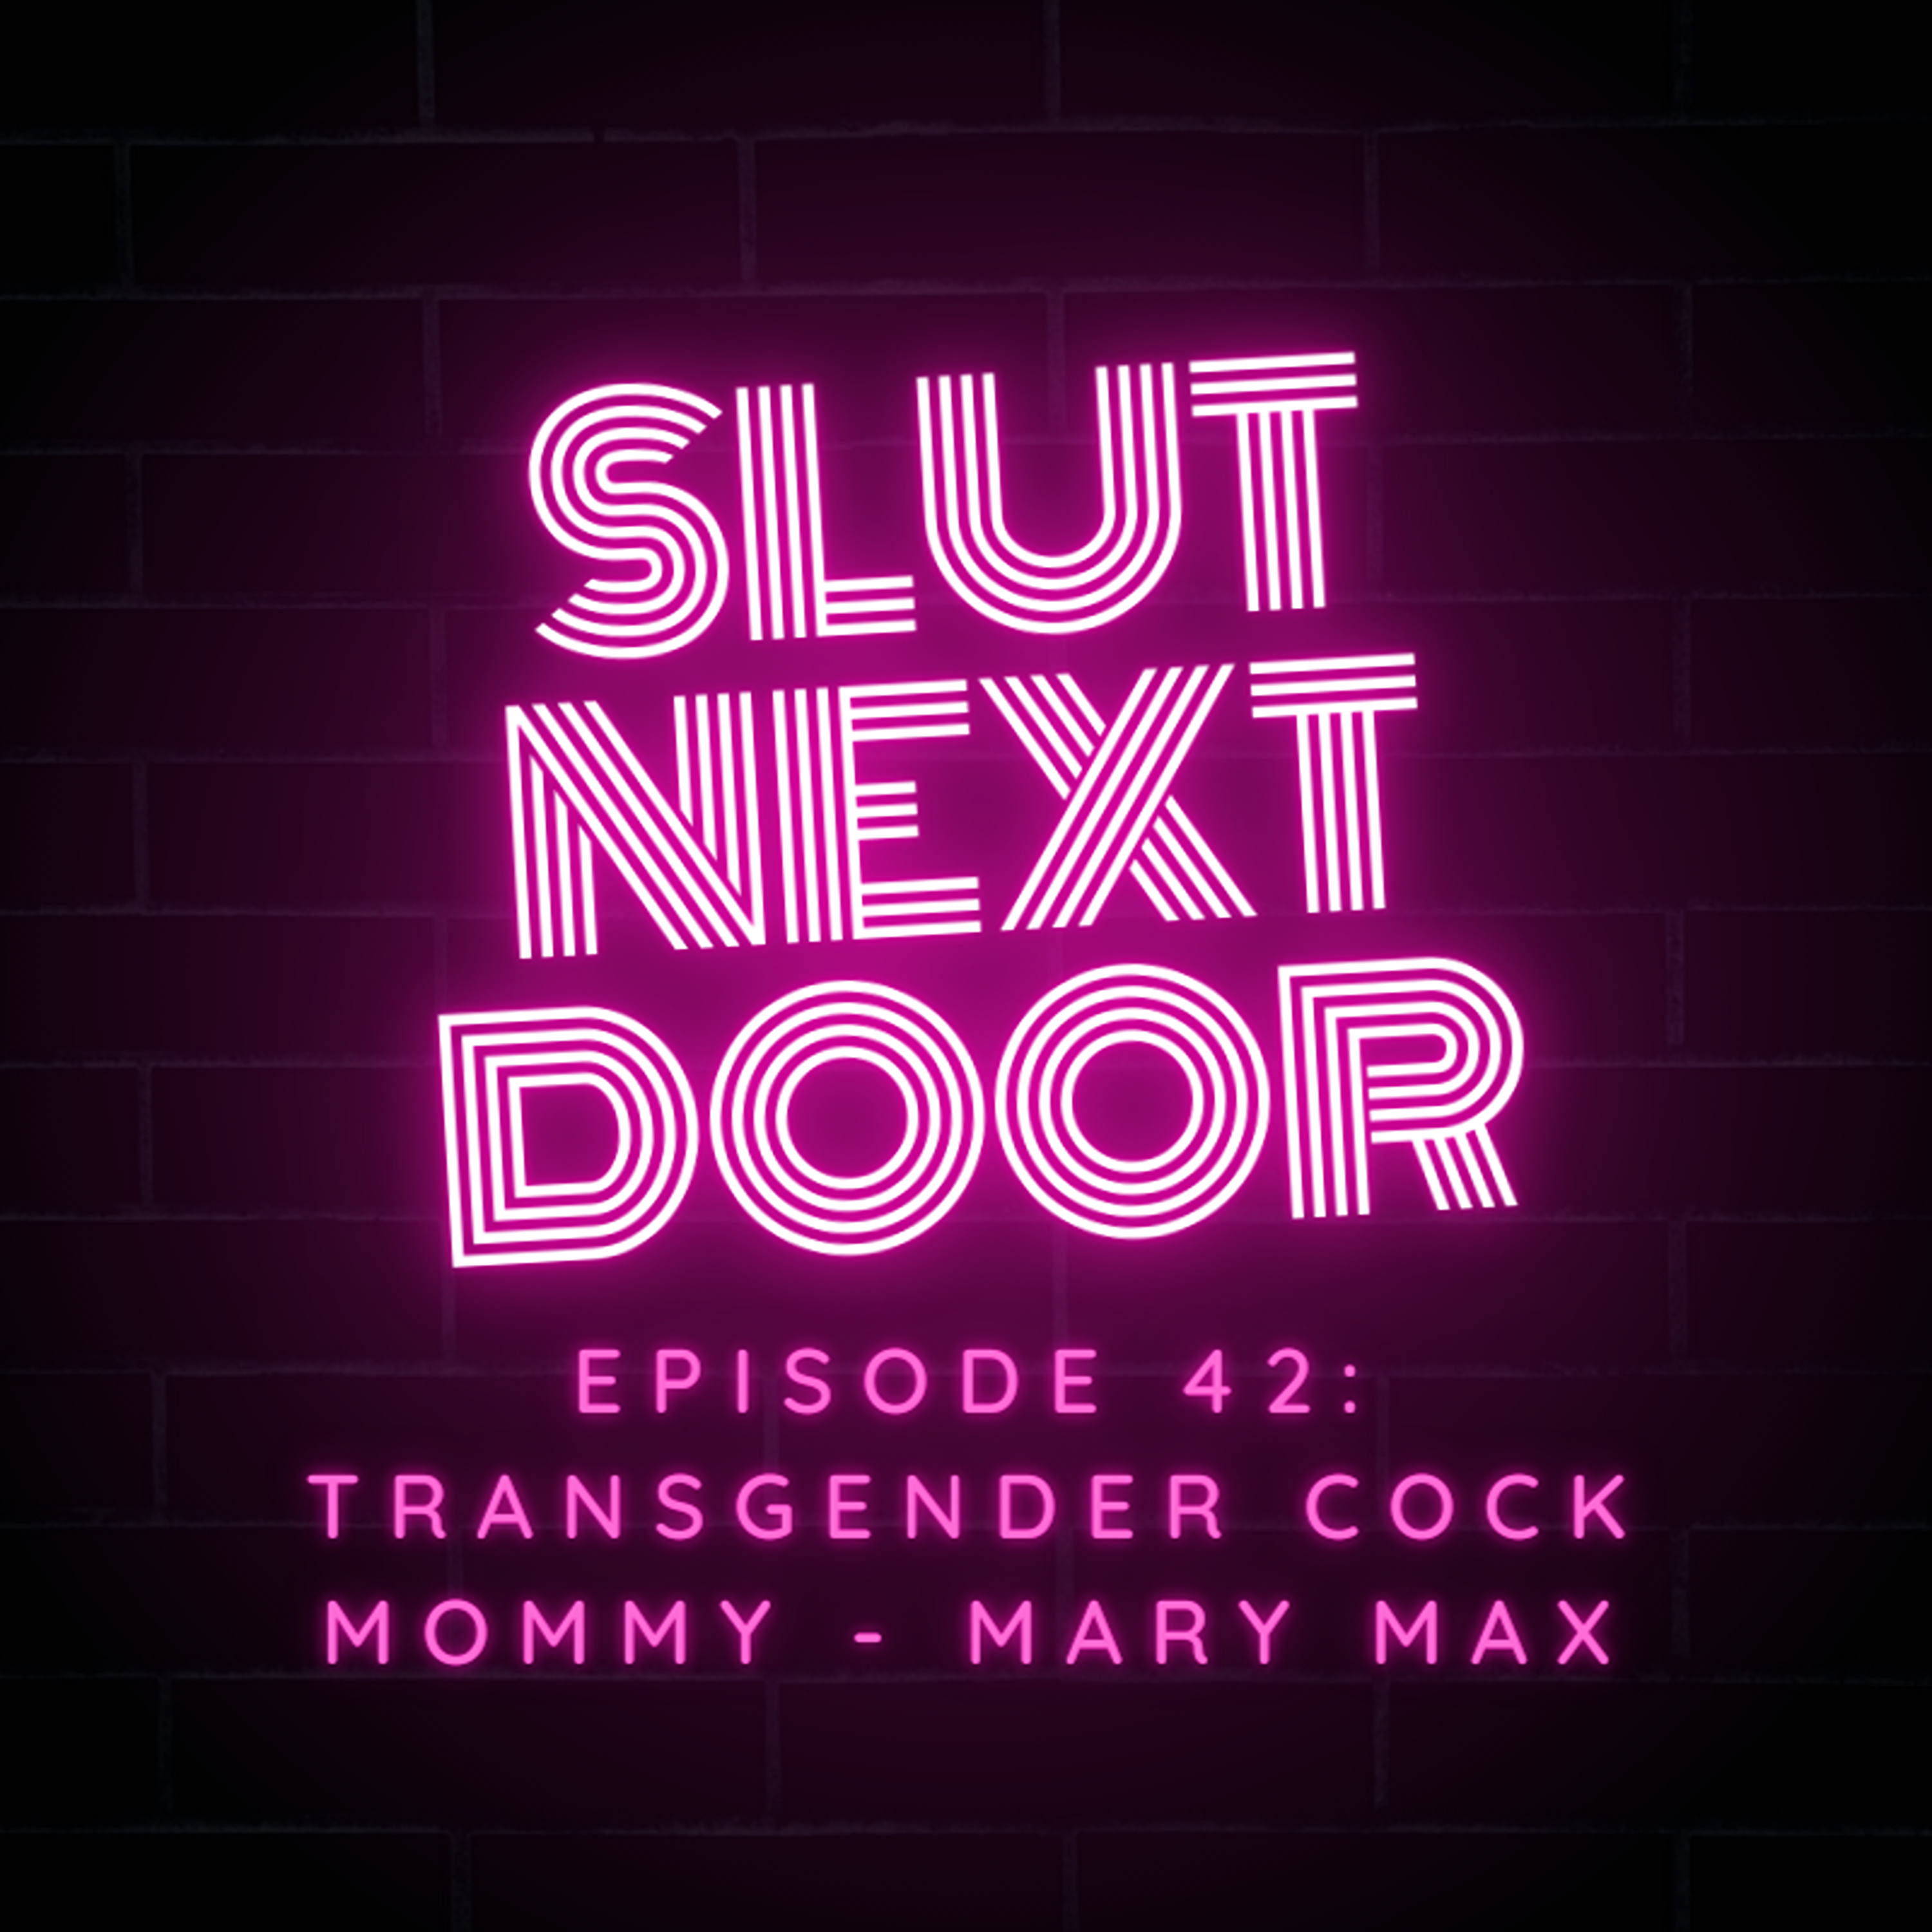 Ep 42 Transgender Cock Mommy - Mary Max